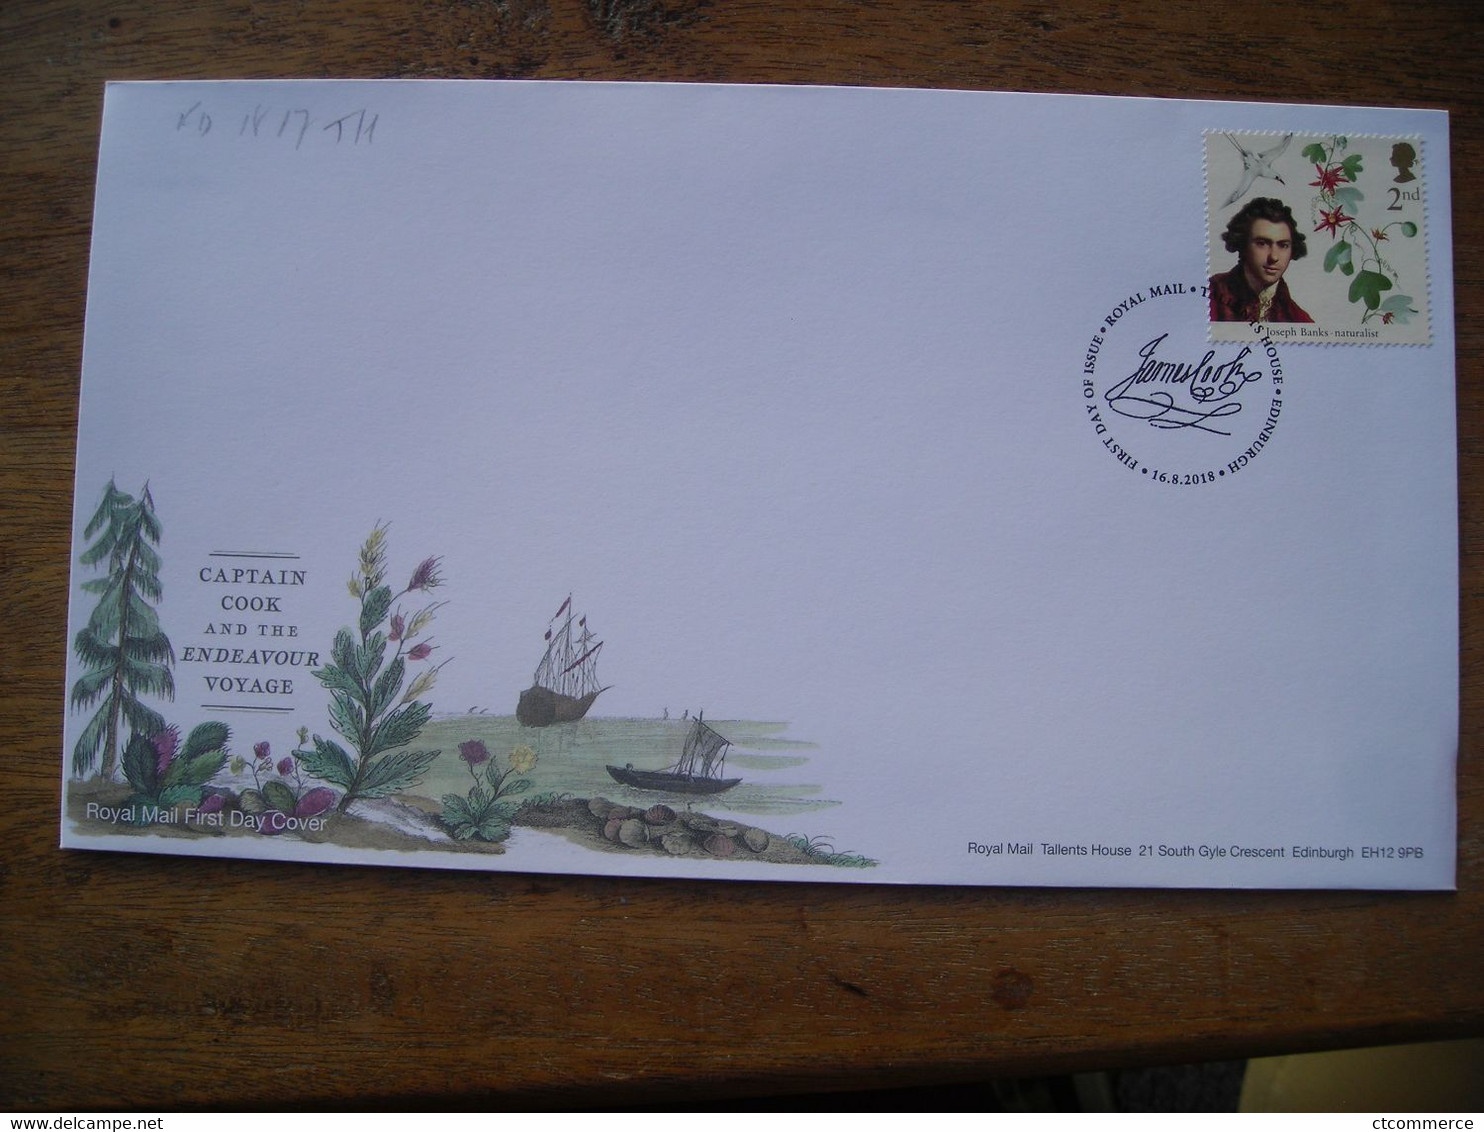 FDC Captain Cook And The Endeavour Voyage, Joseph Banks Naturalist - 2011-2020 Decimal Issues